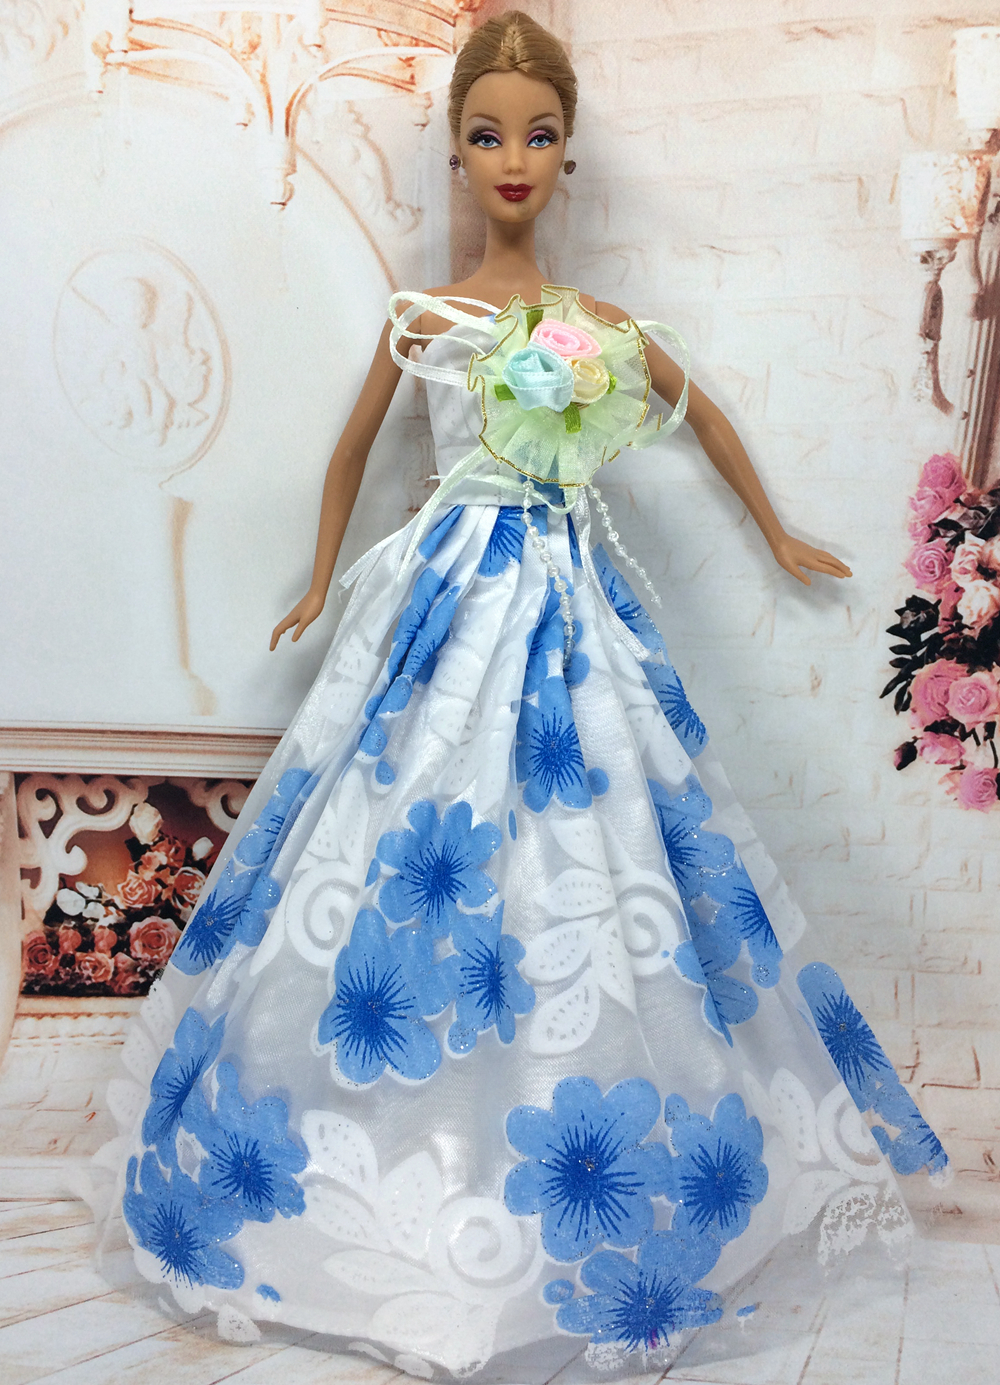 NK One Pcs Handmade Princess Wedding Dress Noble Party Gown For Barbie Doll Fashion Design Outfit Best Gift For Girl' Doll 018A